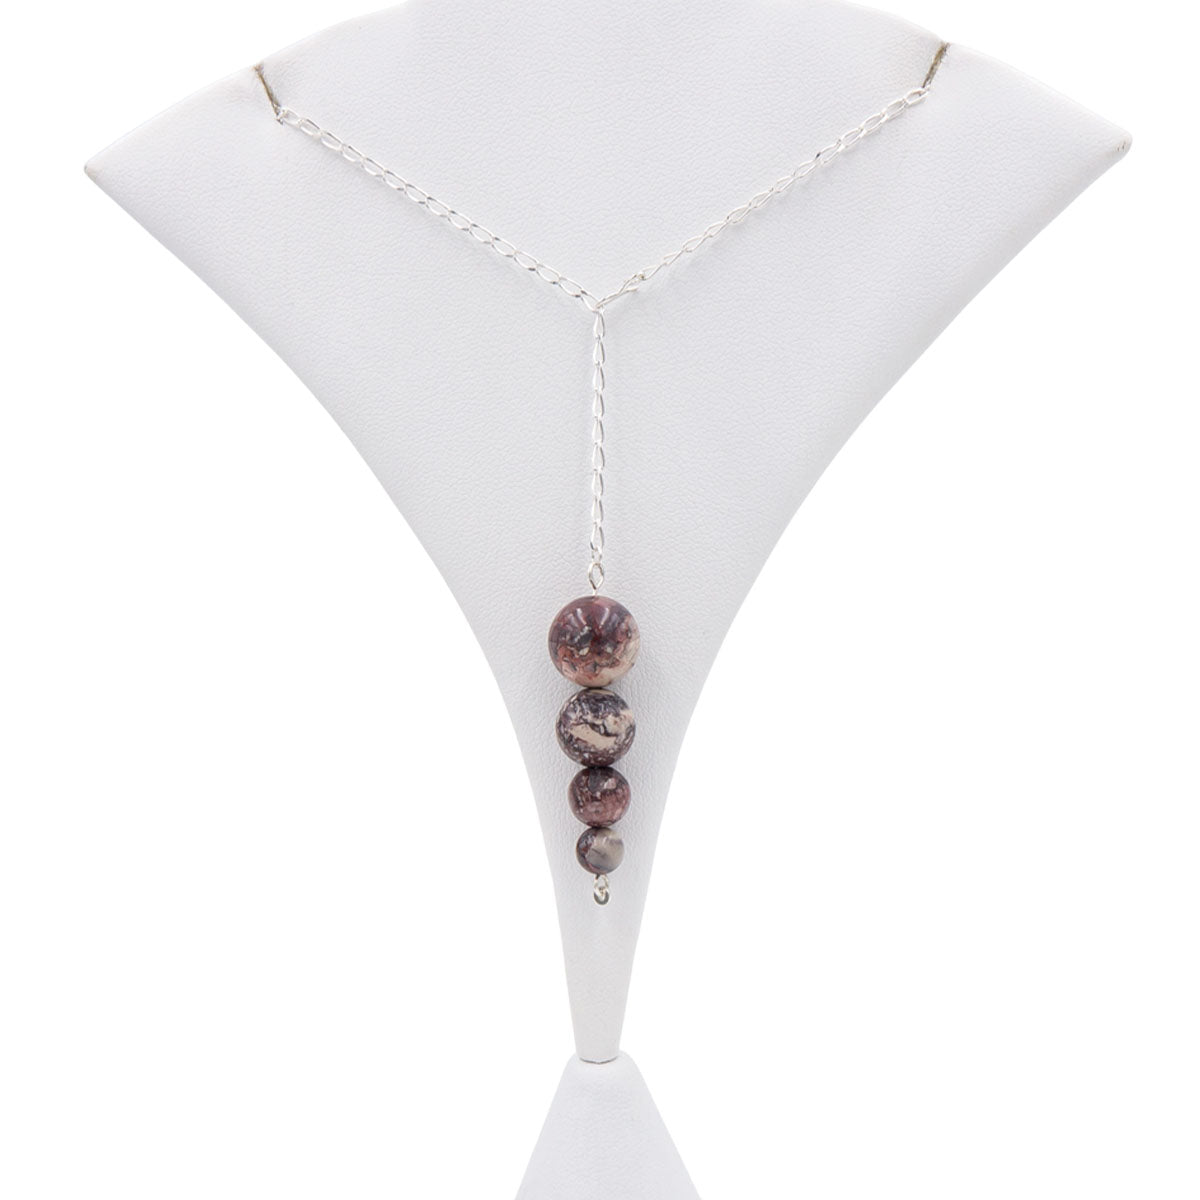 Handmade Porcelain Jasper Sterling Silver Lariat Necklace | Eco-Friendly Jewelry | Adjustable Length | Hypoallergenic & Nickel-Free | Natural Stone